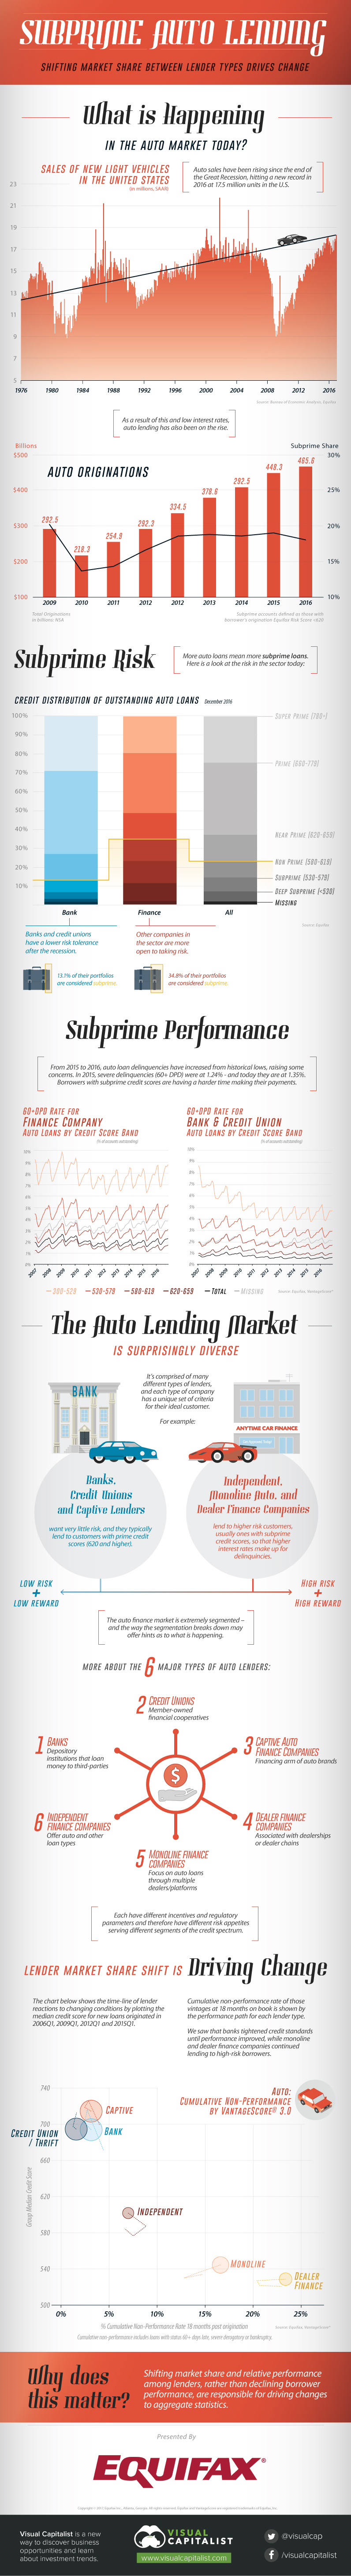 What's Happening with Subprime Auto Loans?